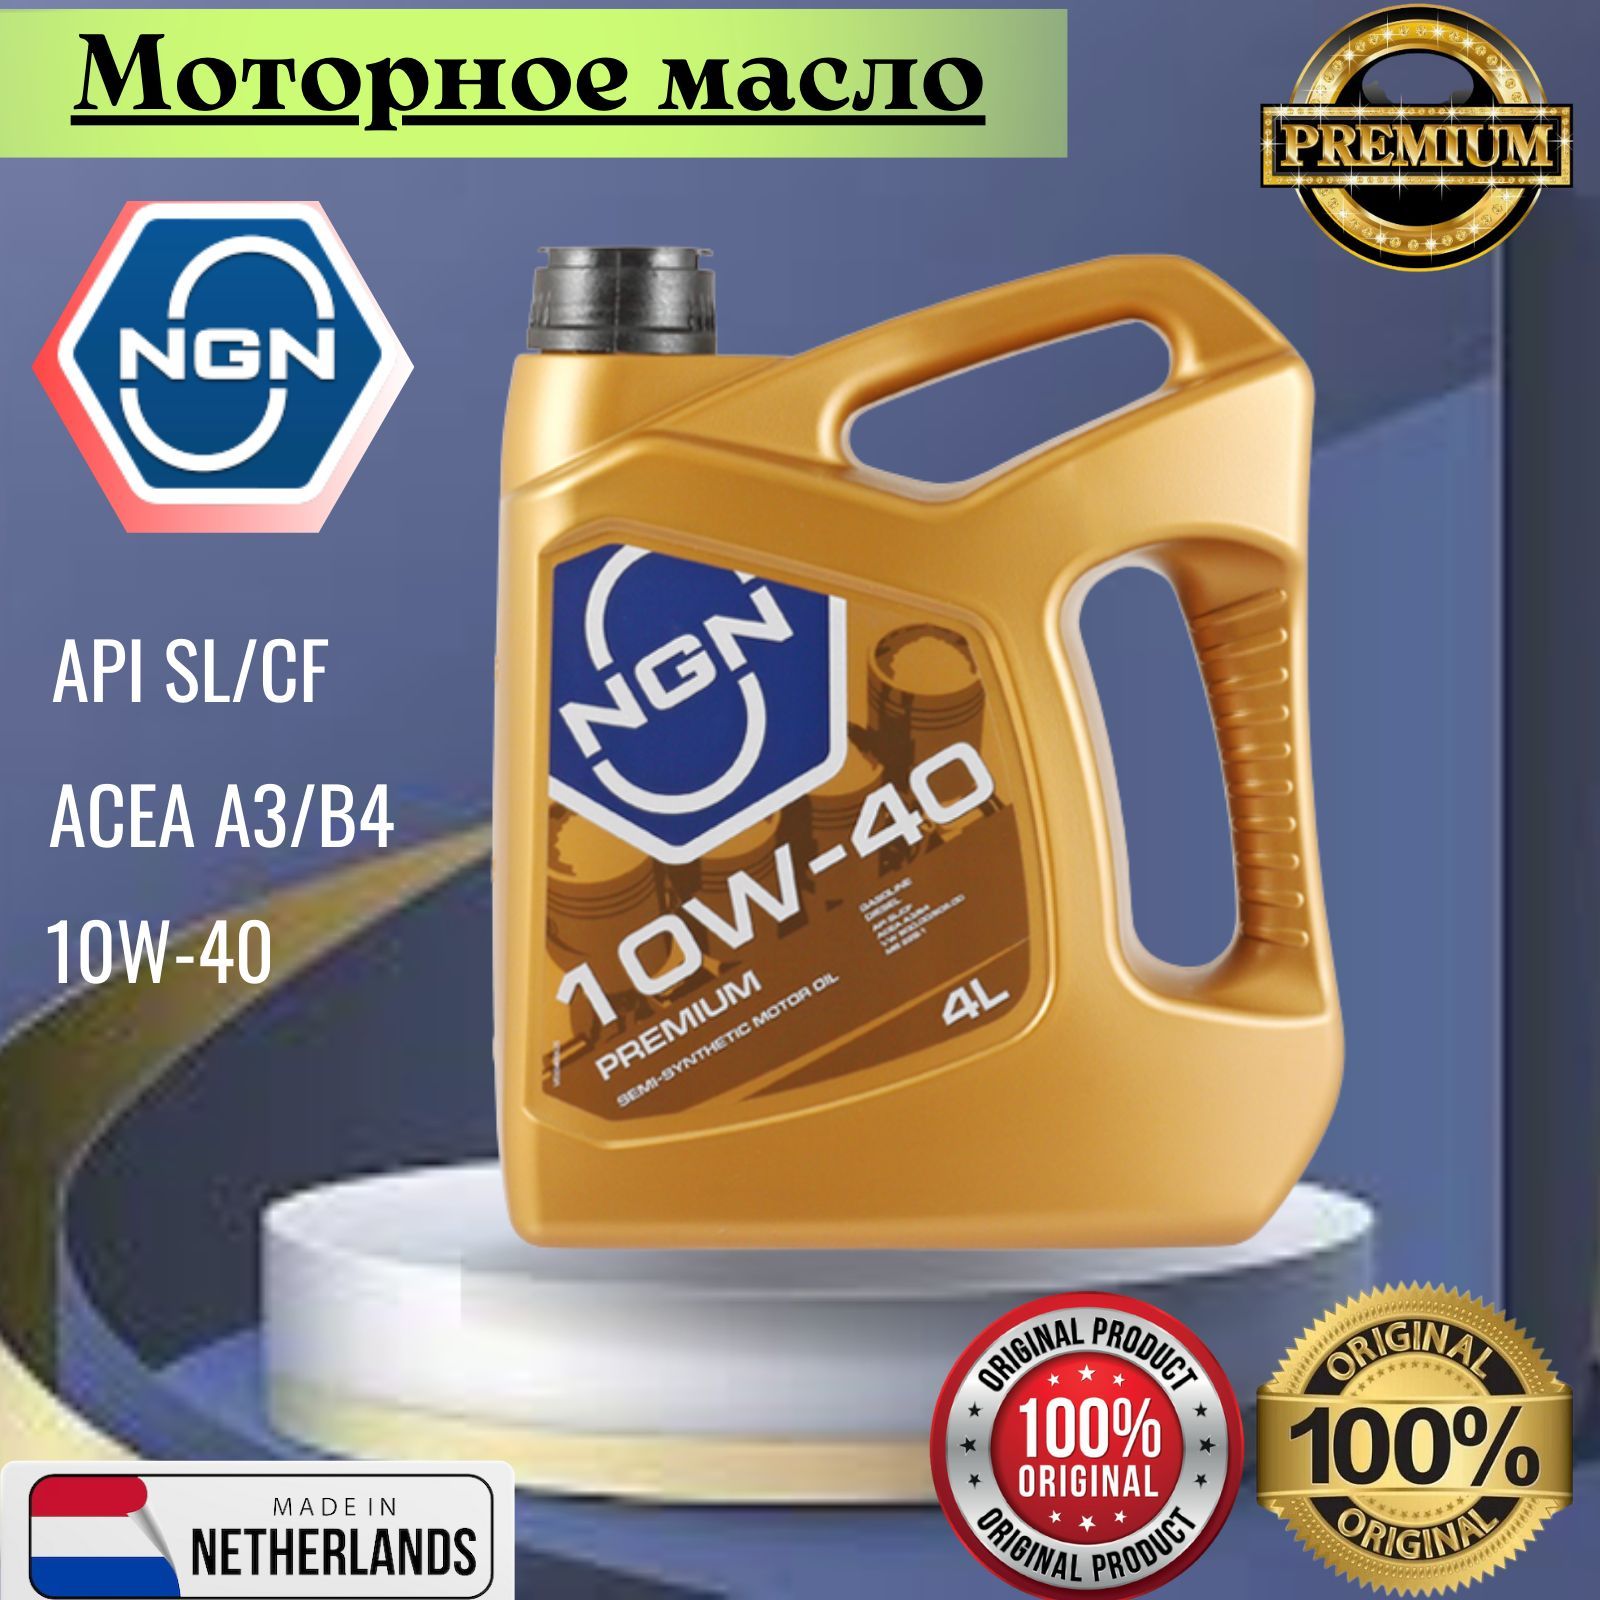 Масло ngn 10w 40. NGN масло моторное. Масло NGN полусинтетика. Моторное масло Аккора. Моторное масло арт.